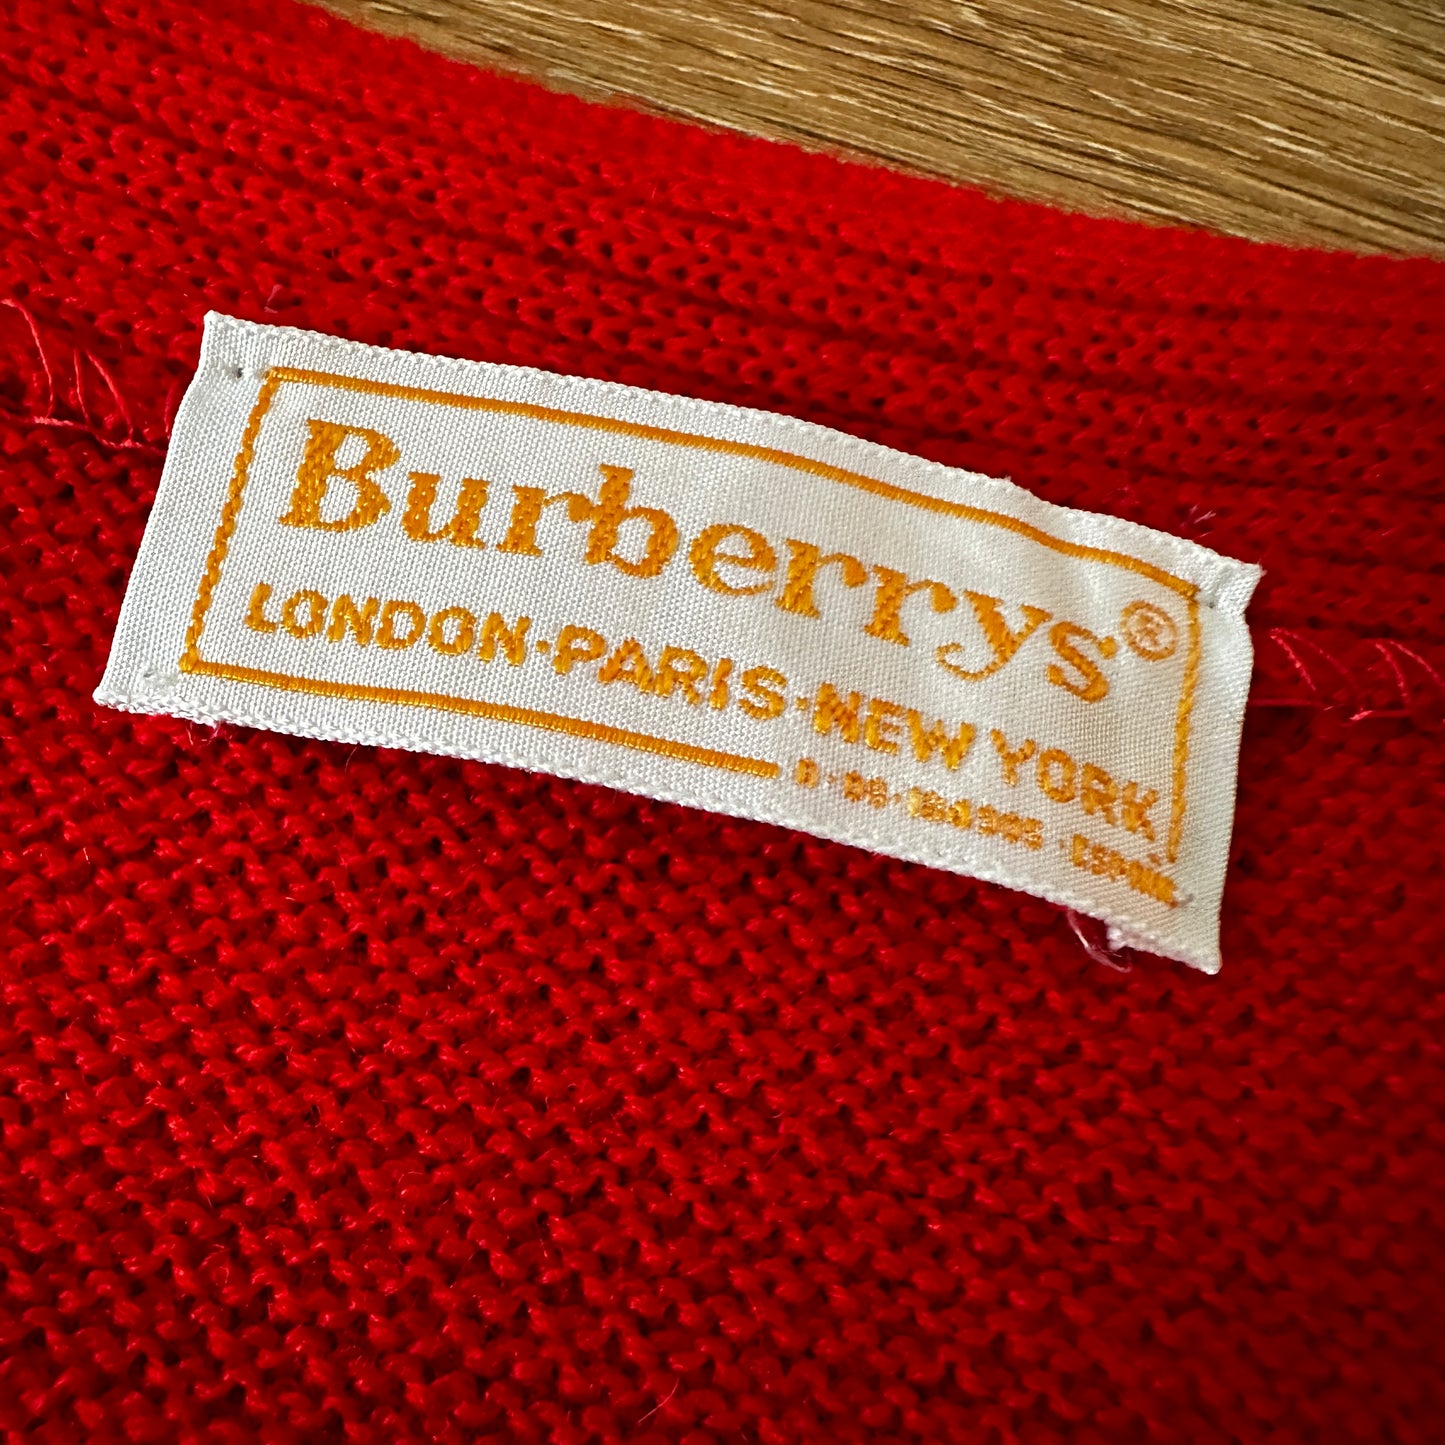 Burberrys Vintage 80s Golf Club Cardigan Red - Deadstock - 7 / XL - Made in Spain